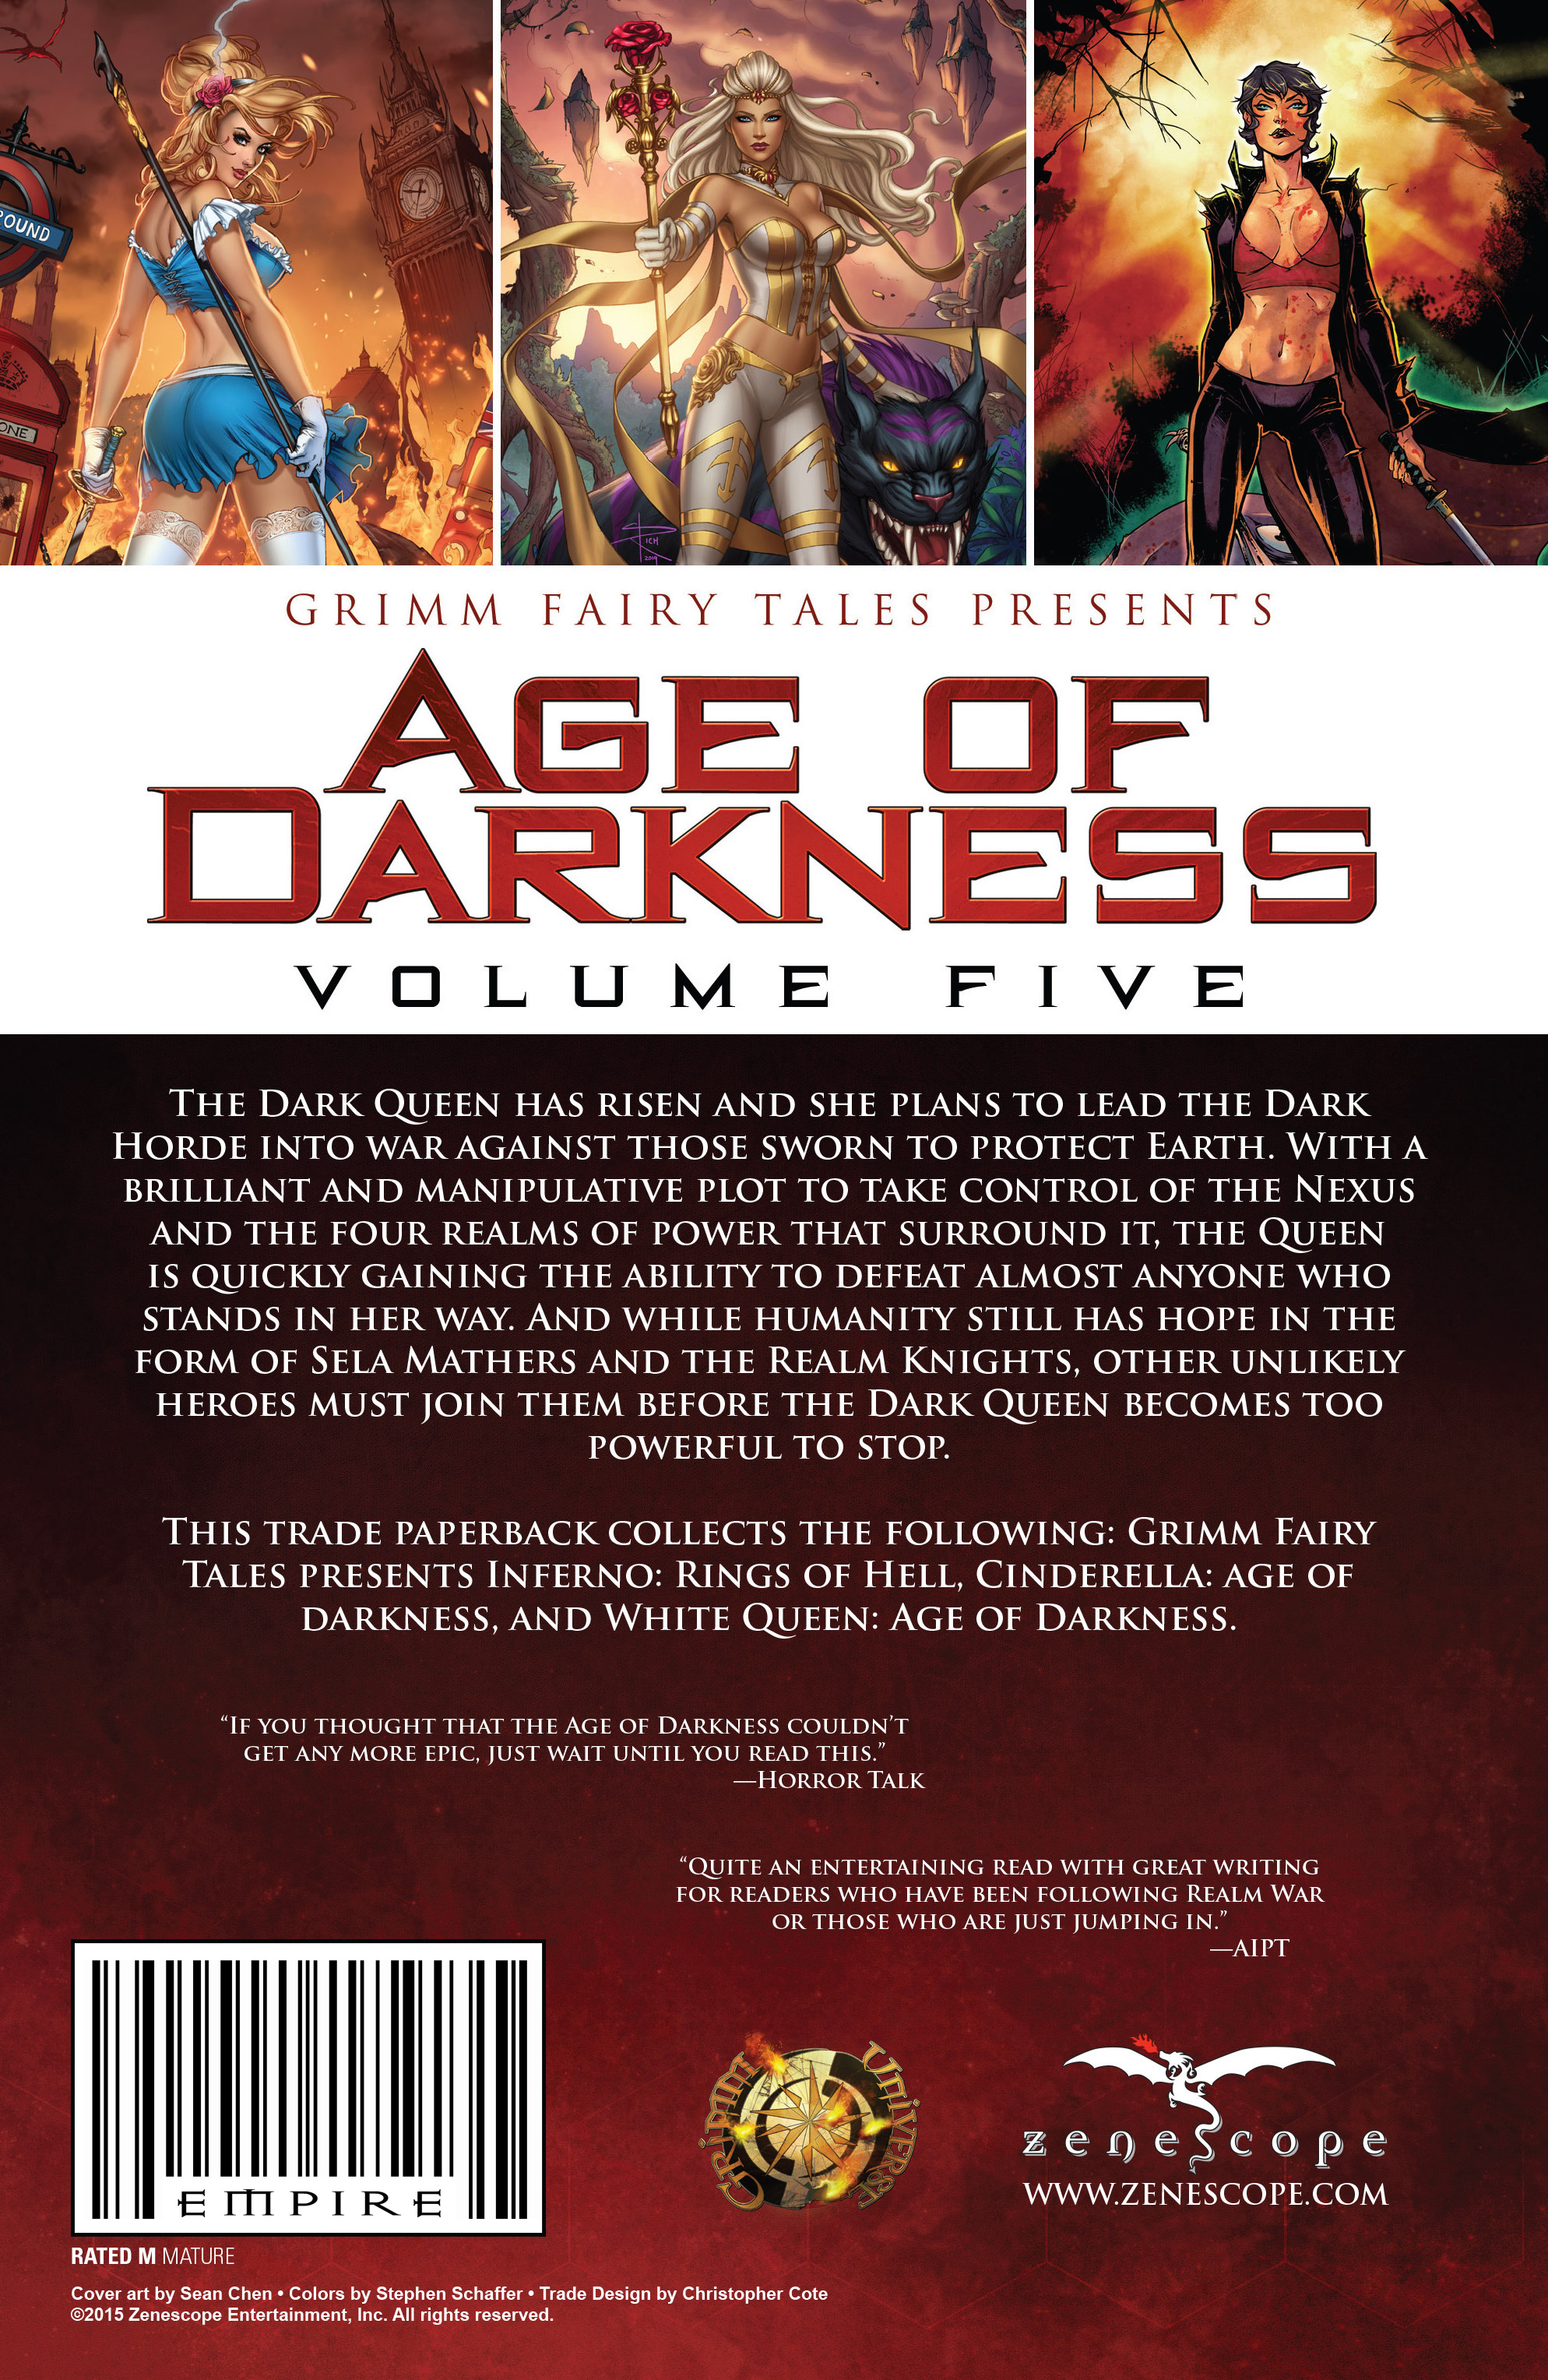 Read online Grimm Fairy Tales presents Age of Darkness comic -  Issue # Full - 246